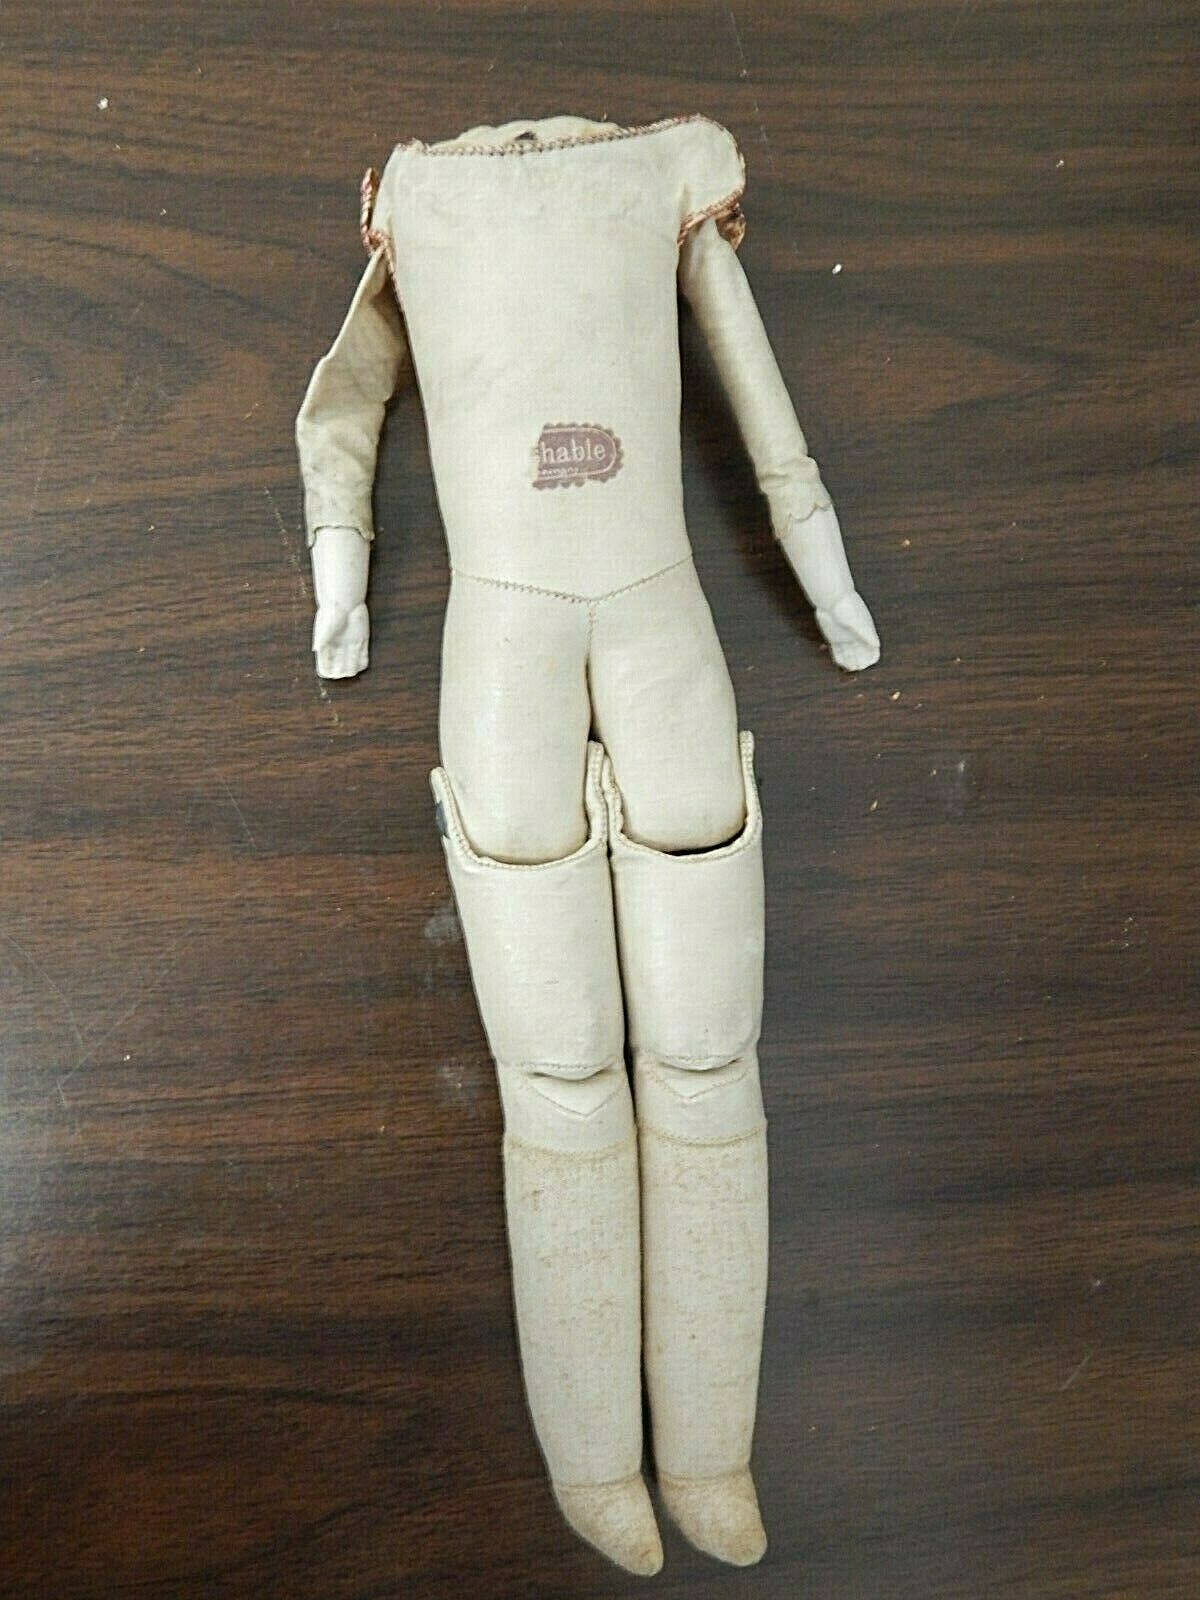 Antique Imitation Leather 15" Doll Body W/bisque Lower Arms, Cloth Lower Legs